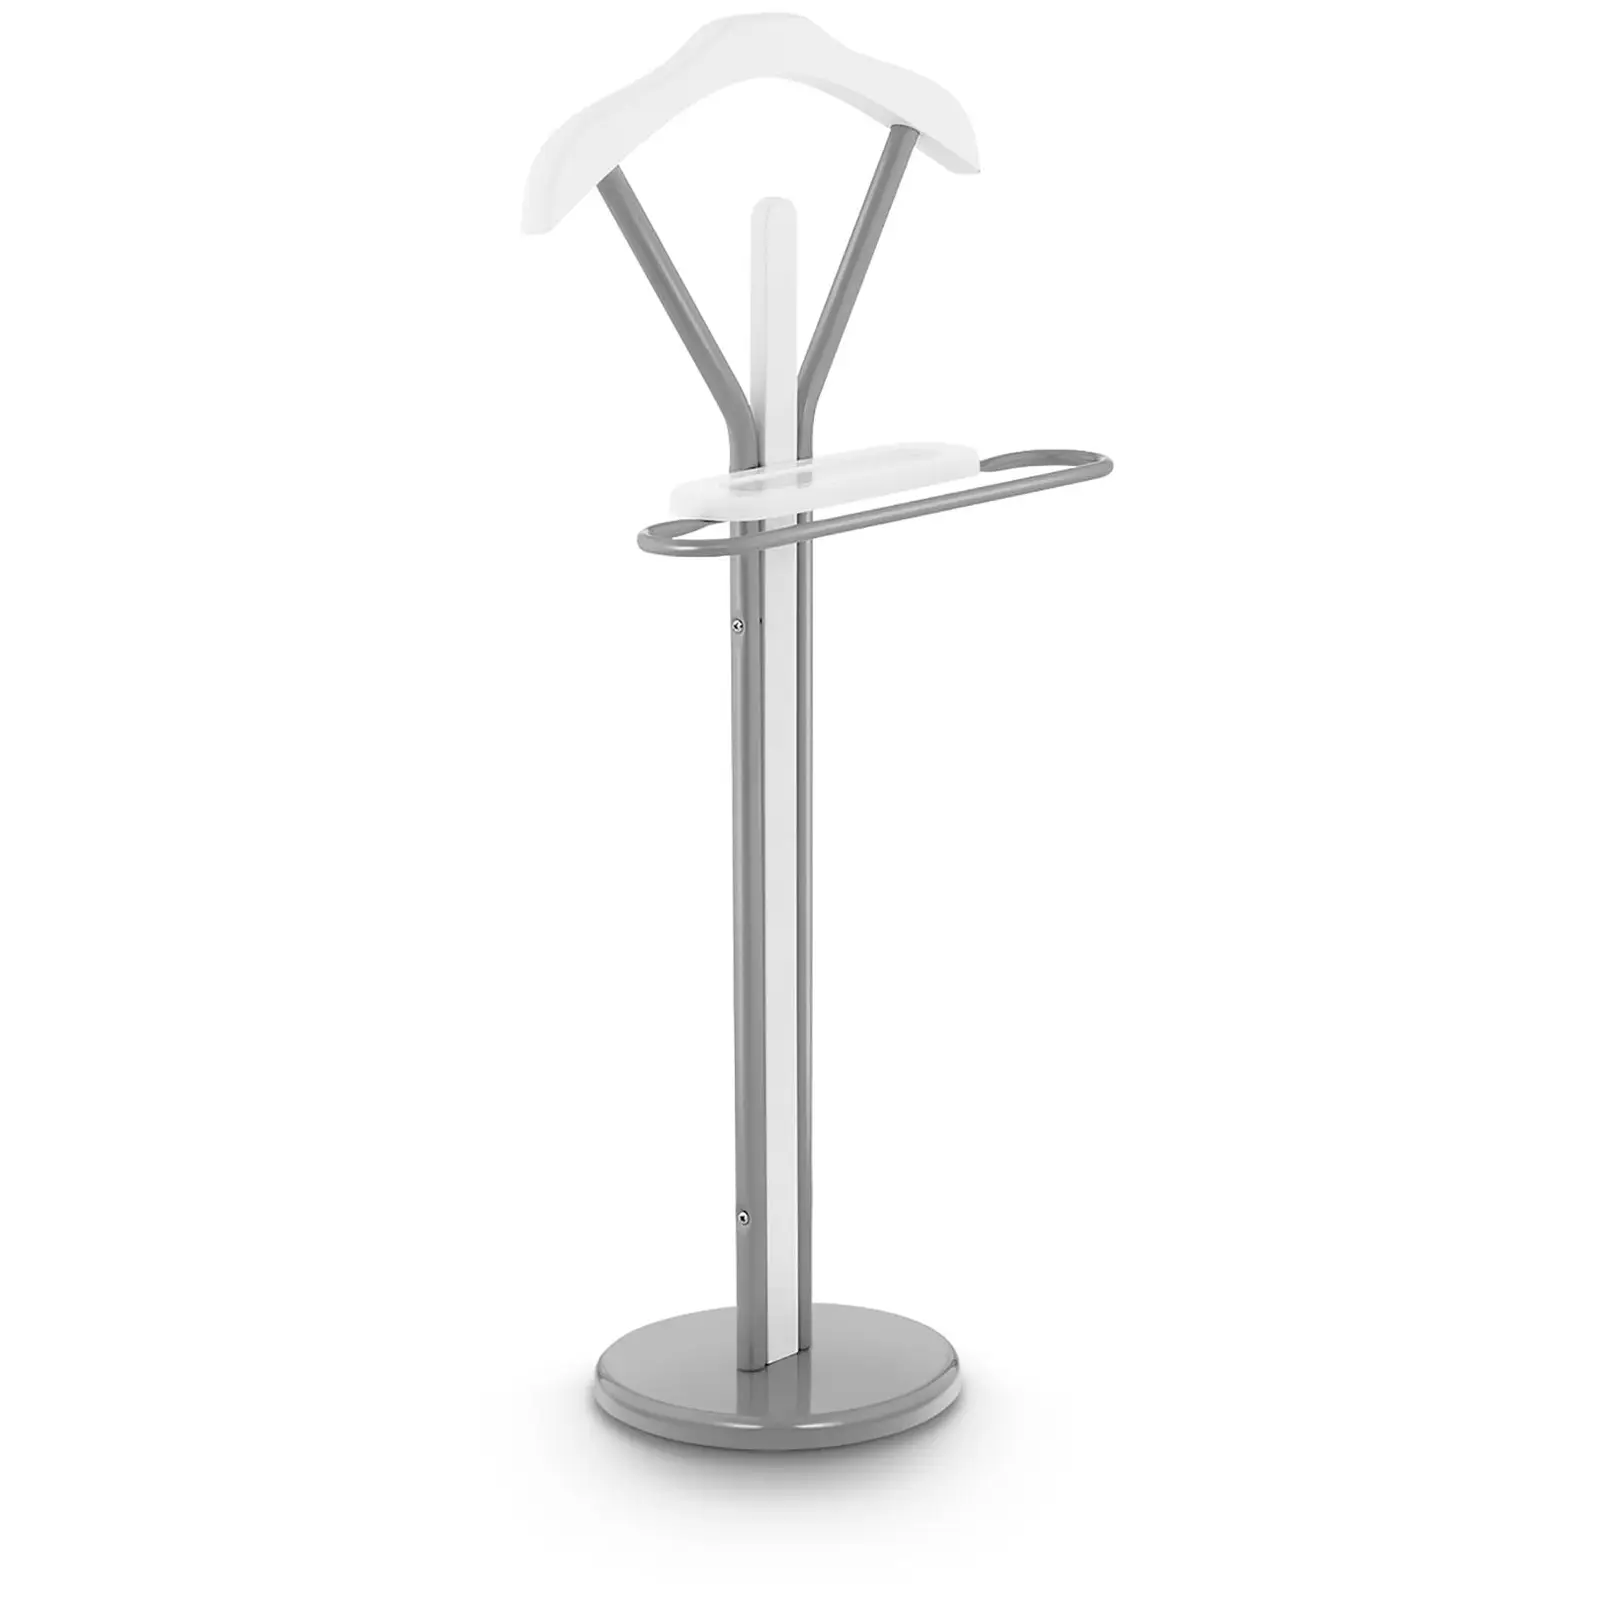 Clothes Valet Stand - silver / white